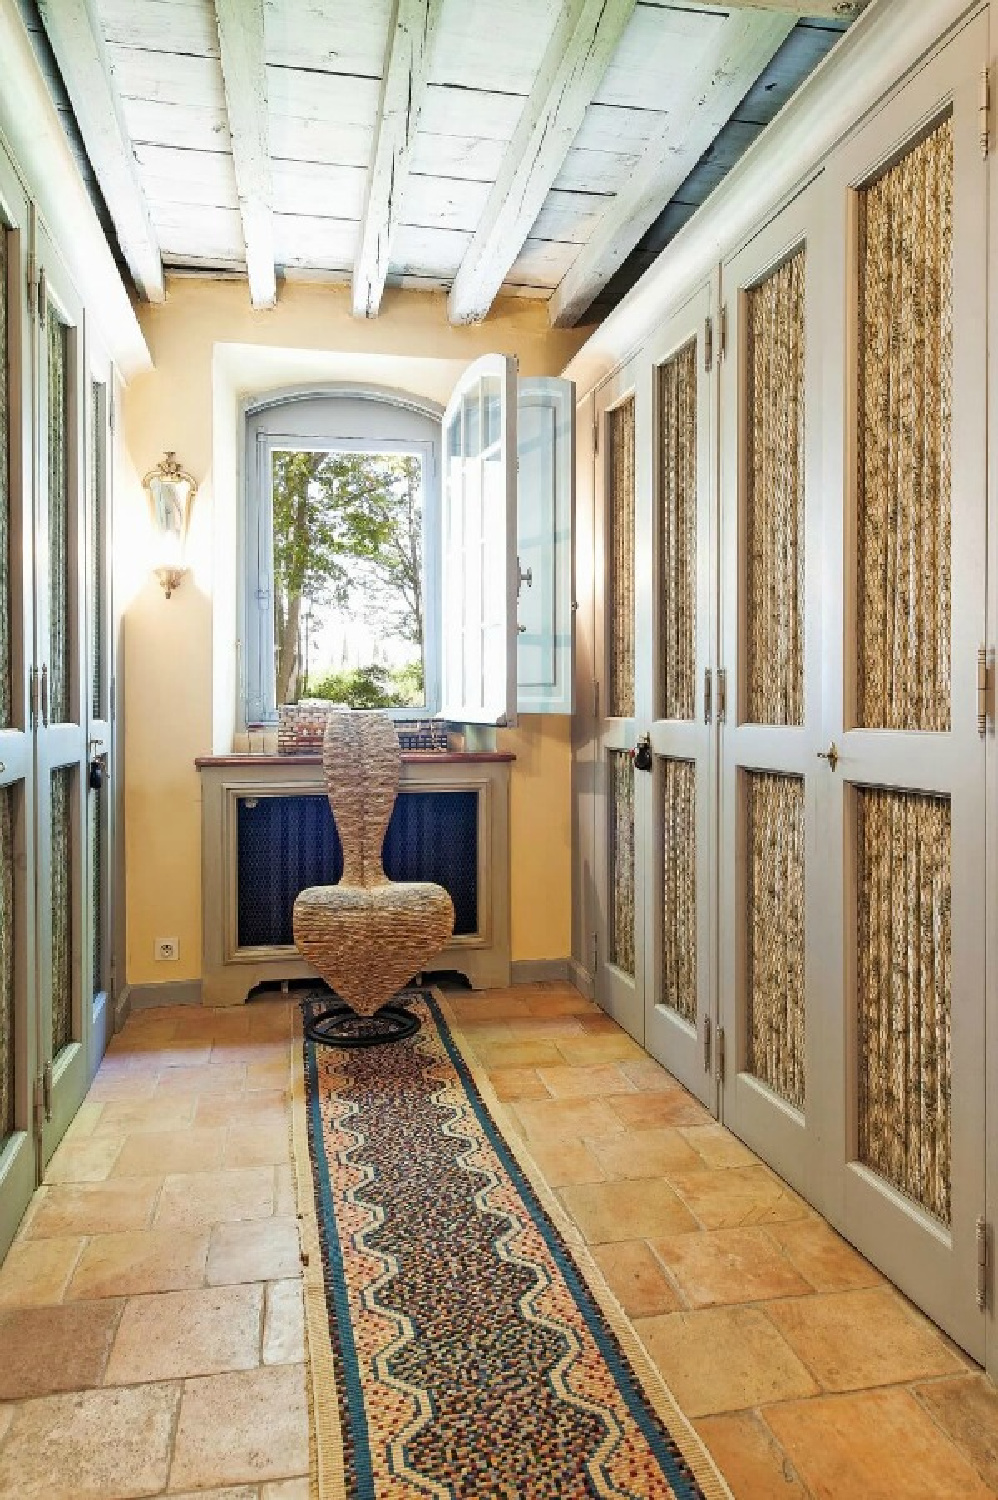 Closet dressing room with terracotta tile flooring in elegant 18th century Provençal French farmhouse Château Mireille. Photo: Haven In. Chateau Mireille in St-Rémy-de-Provence.